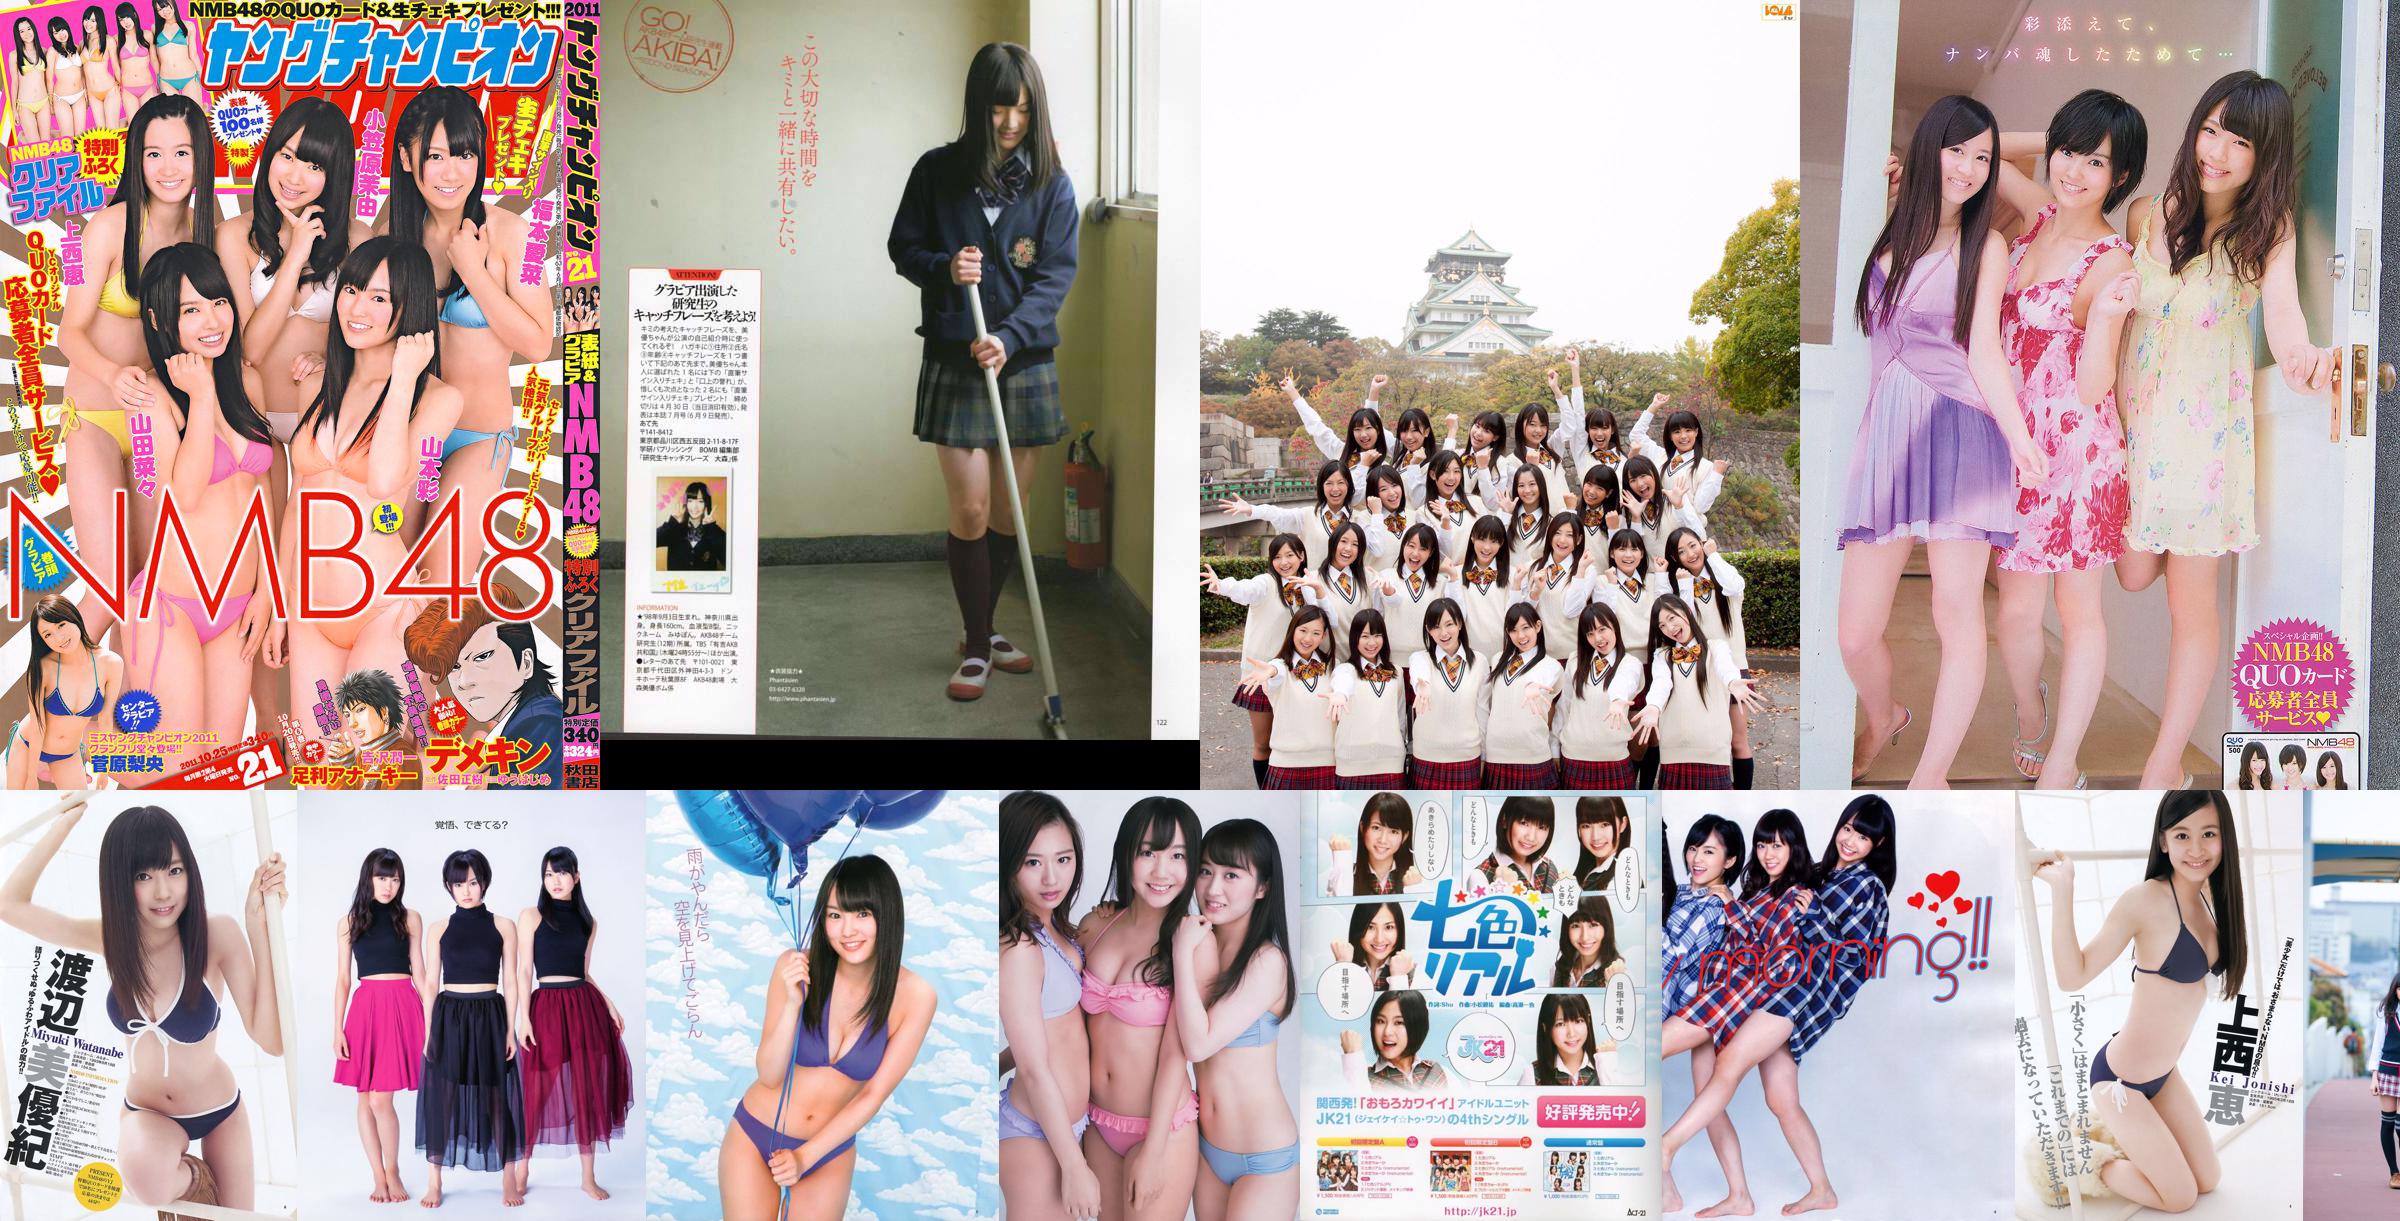 [Bomb.TV] June 2011 issue NMB48 No.17c41d Page 2